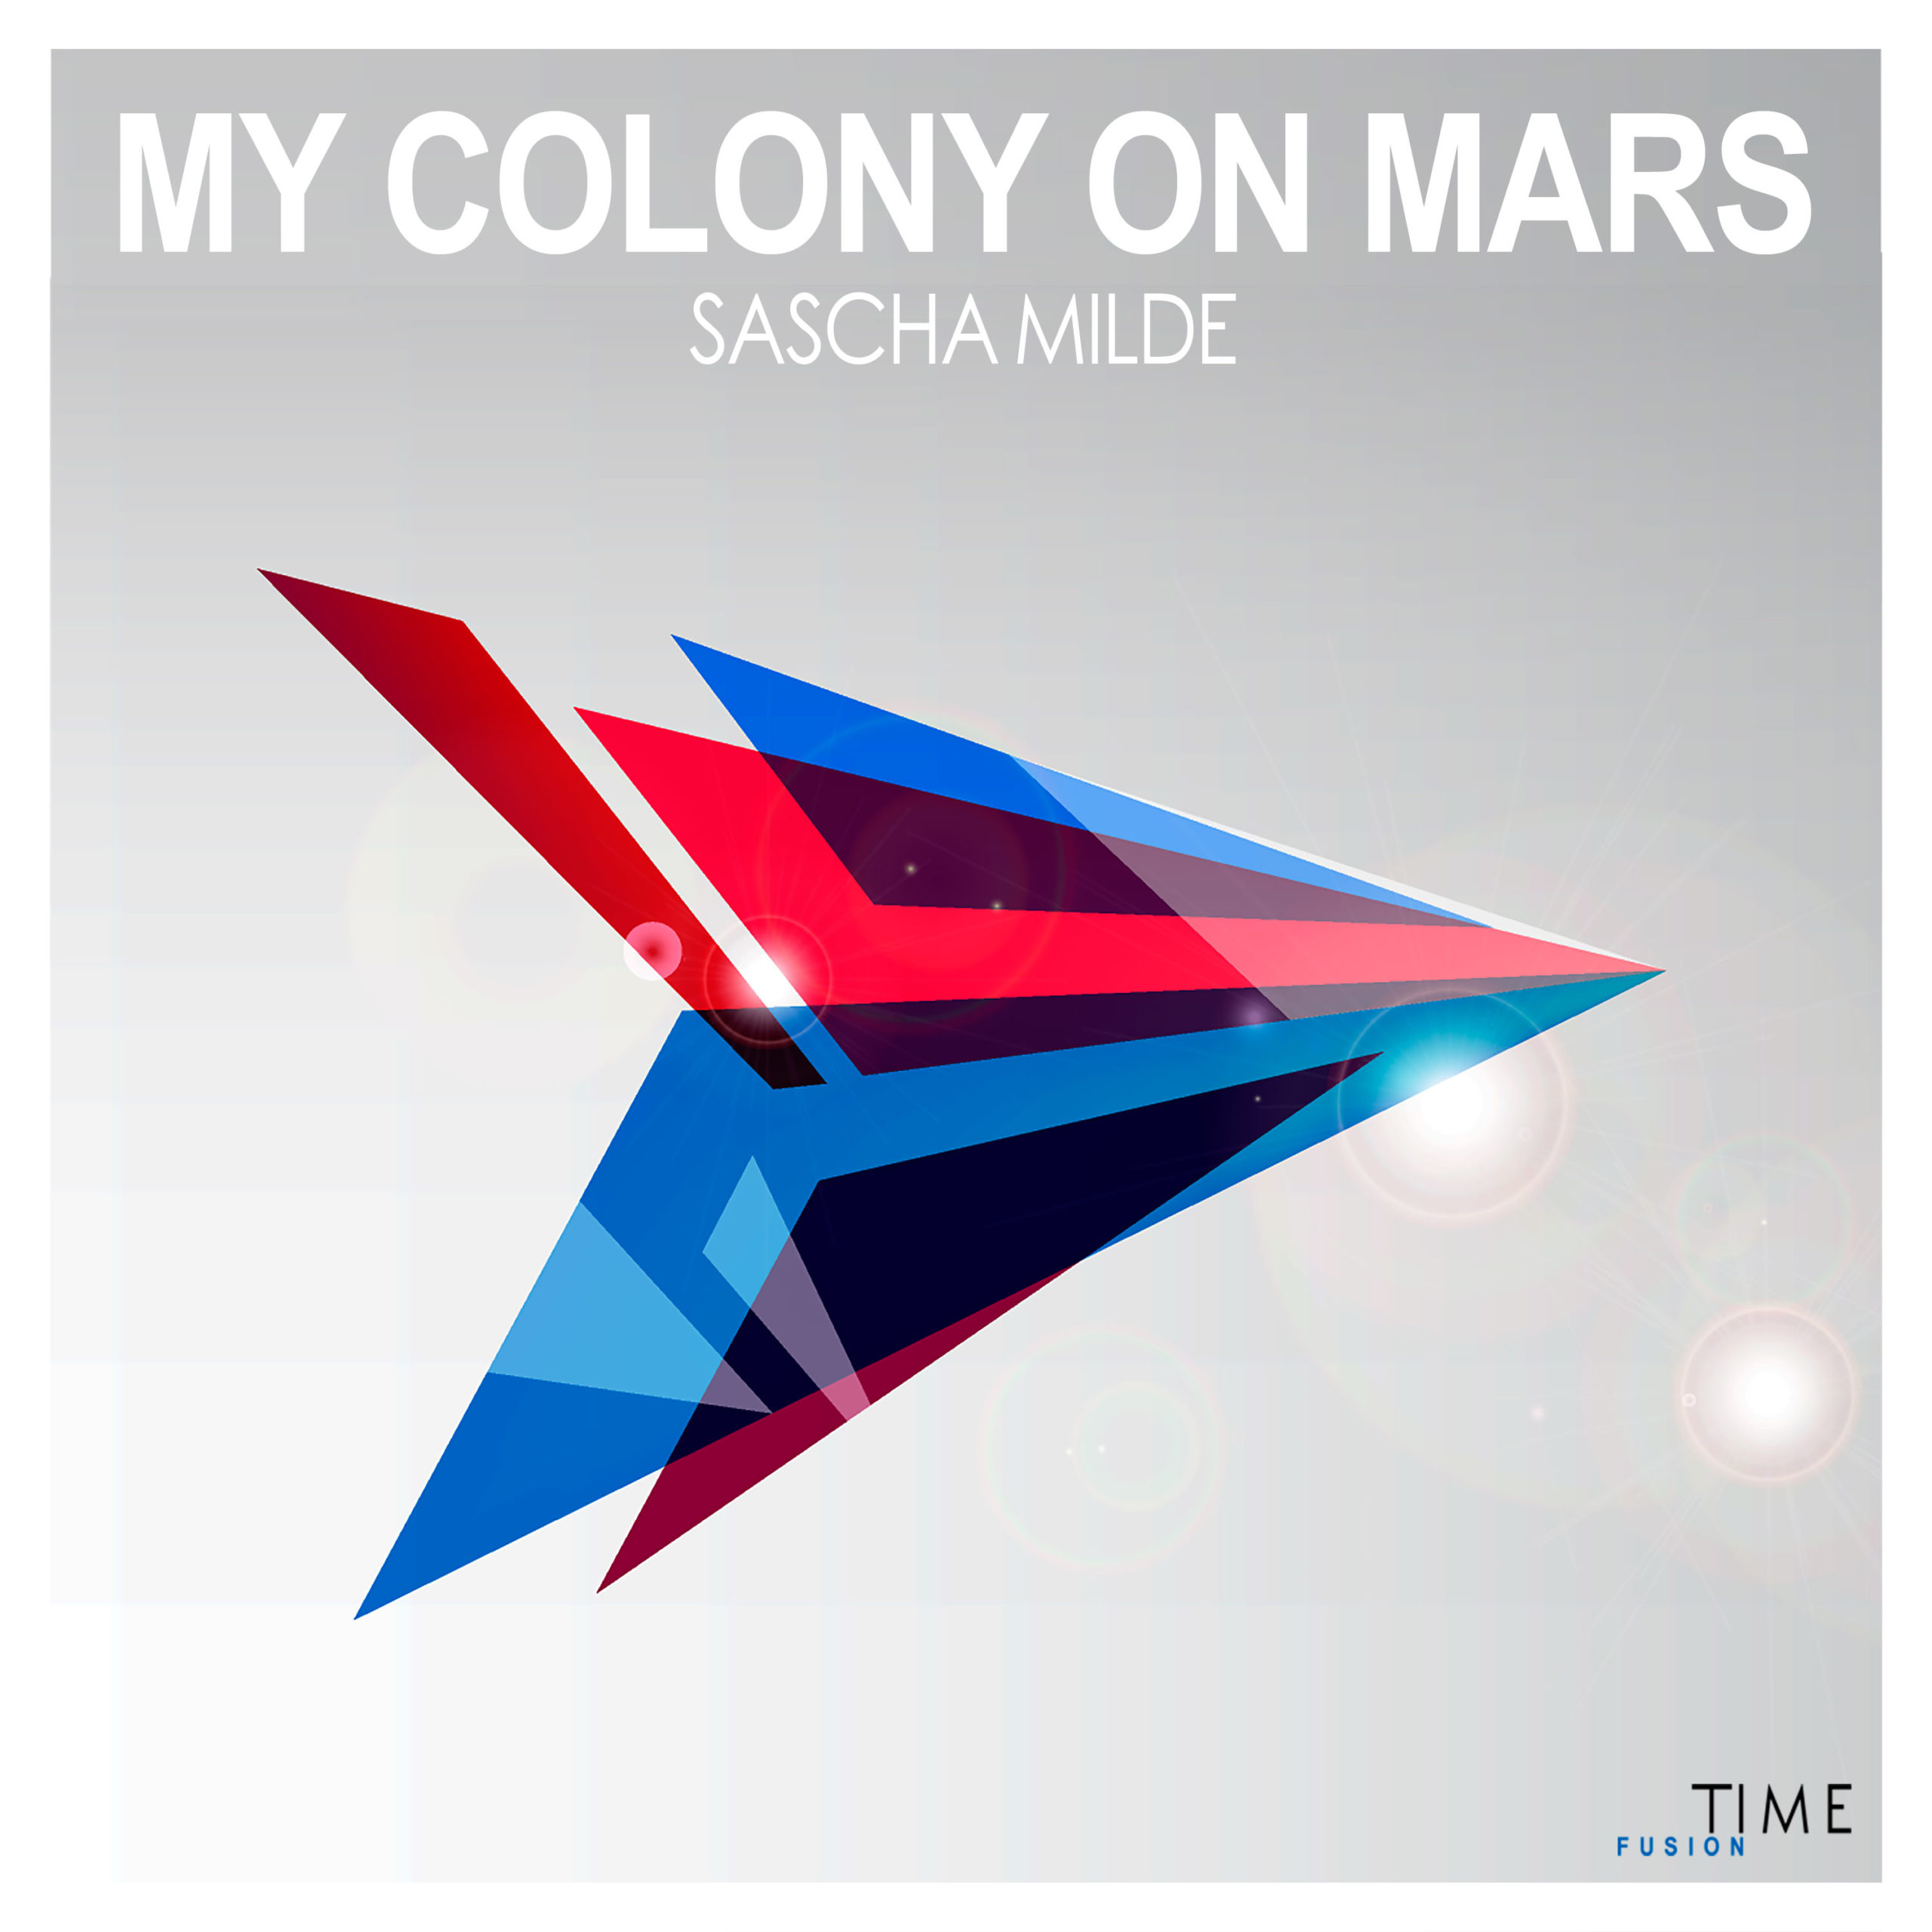 https://www.ultimate-house-records.com/wp-content/uploads/2022/10/tf_Sascha_Milde-My_Colony_on_Mars_Cover_3000px_web-scaled.jpg